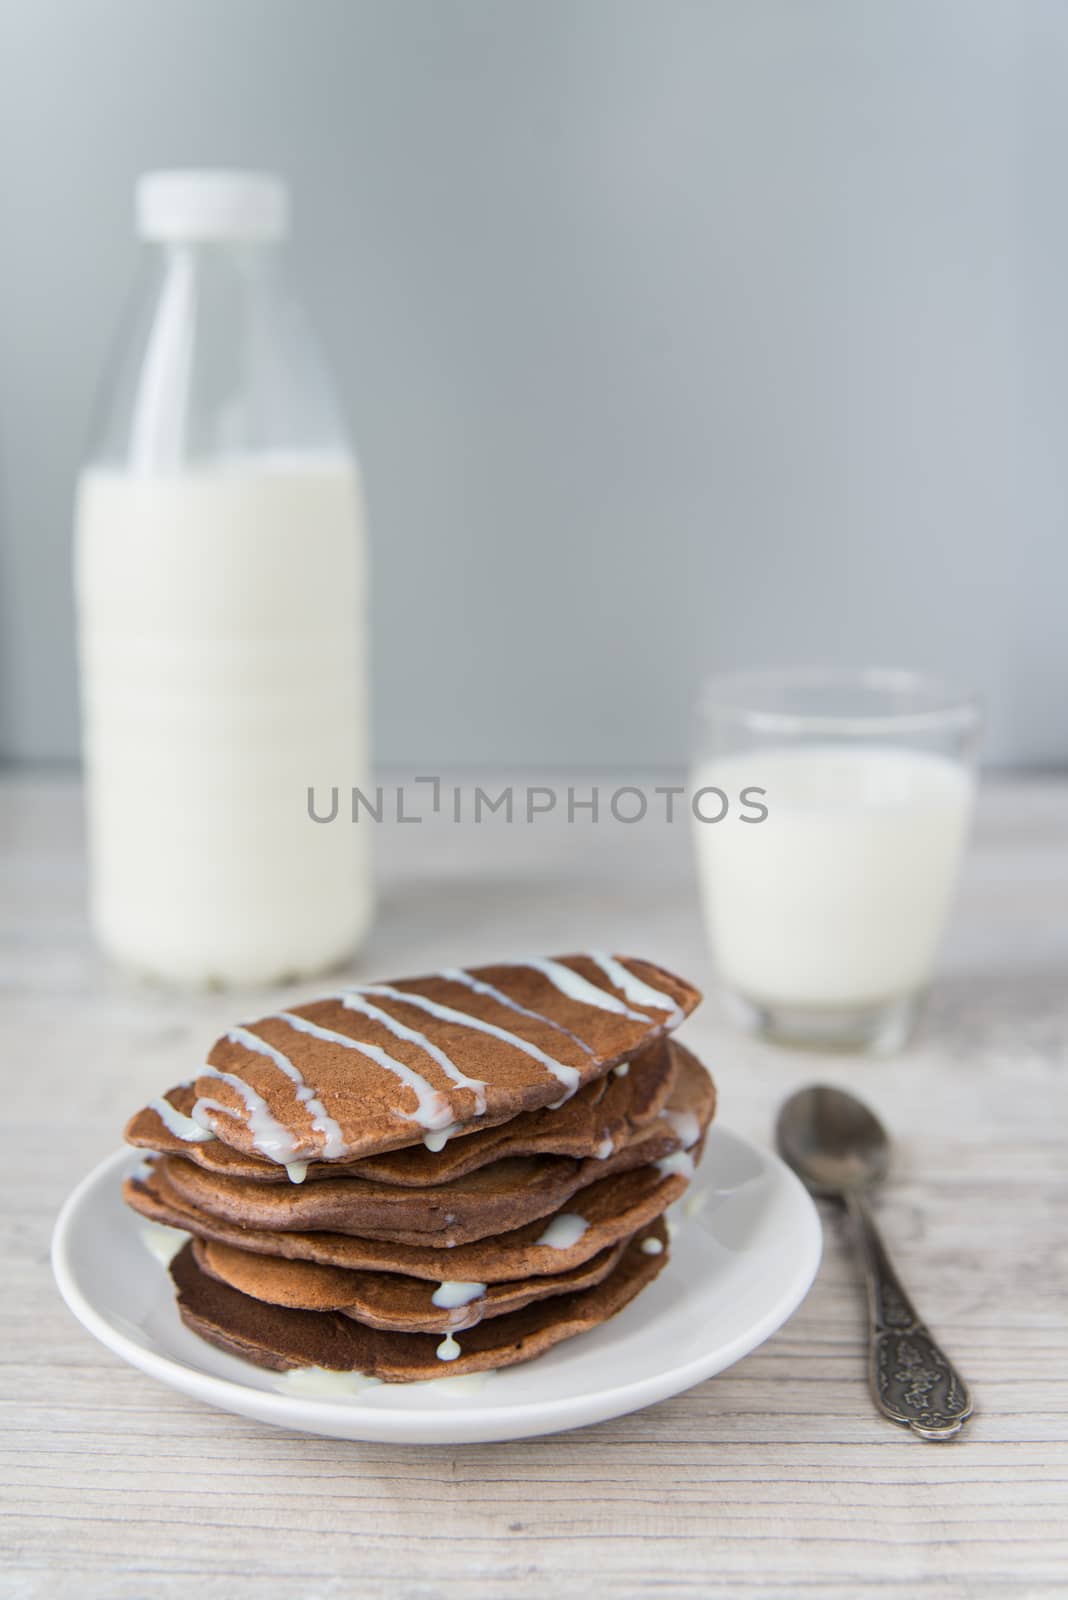 Chocolate pancakes with the glass and bottle of milk